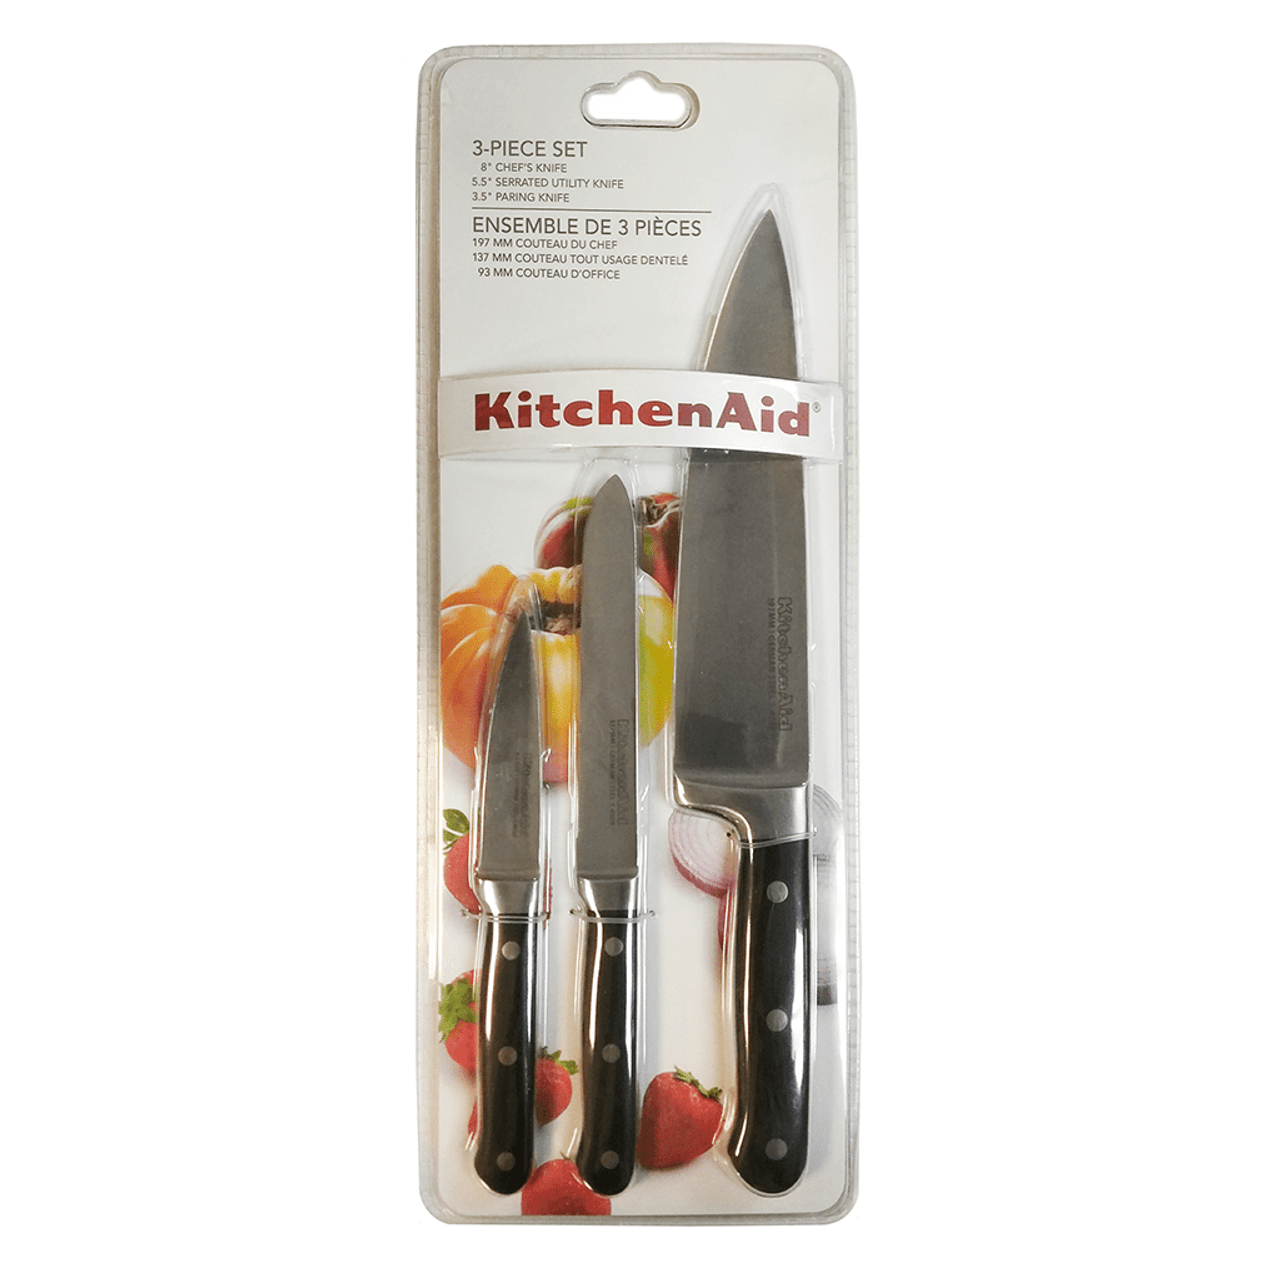 Reviews for KitchenAid Classic Forged 3-Piece Triple Rivet Starter